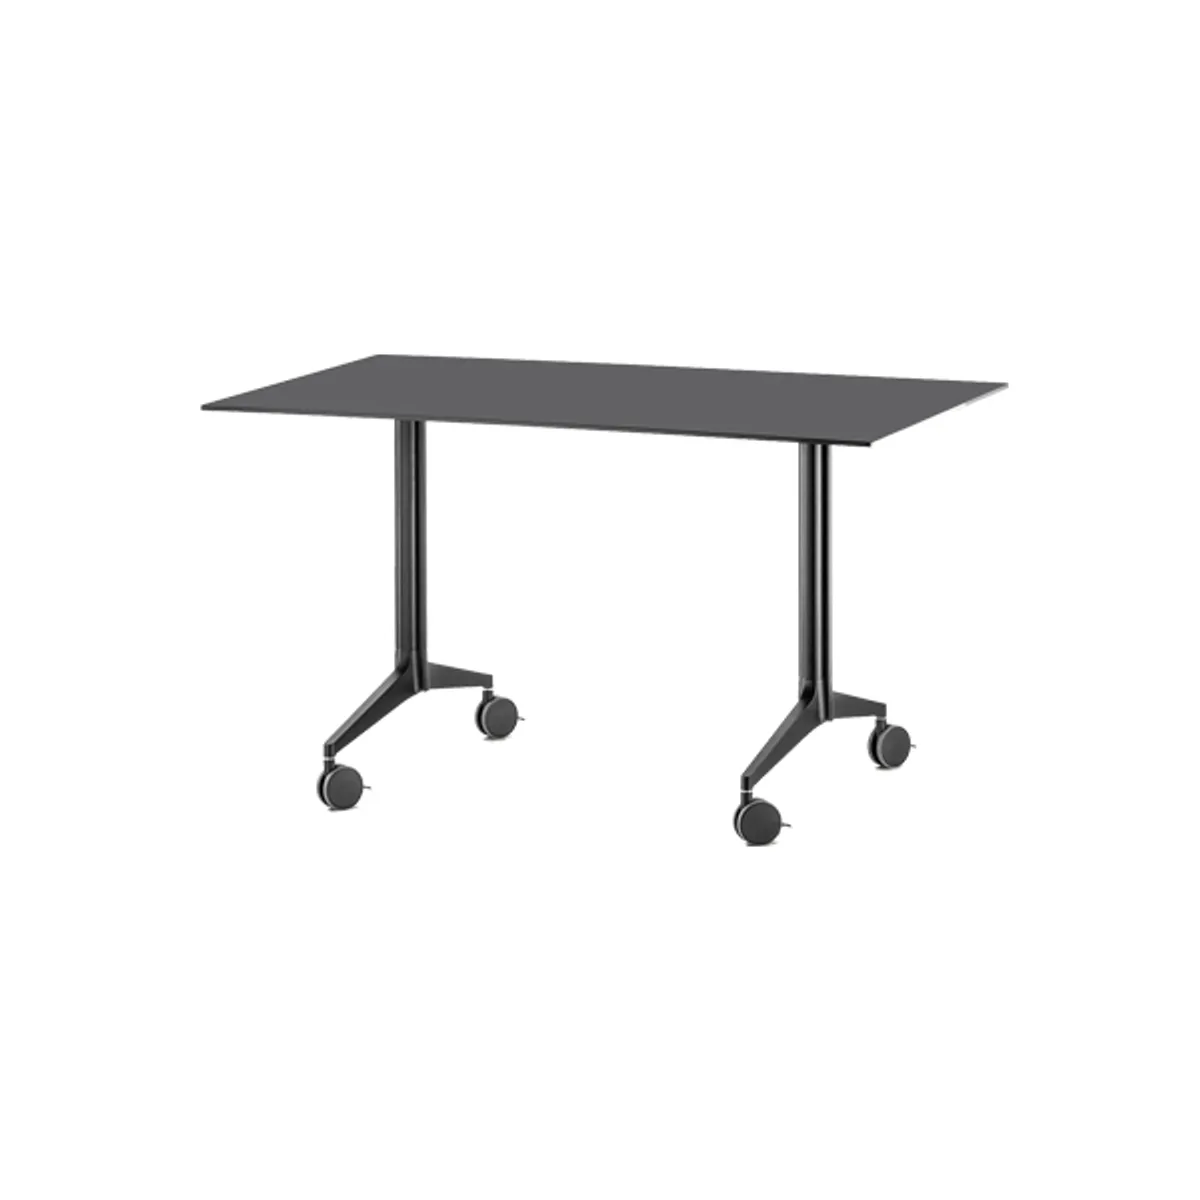 Ypsilon Tilting Table Inside Out Contracts